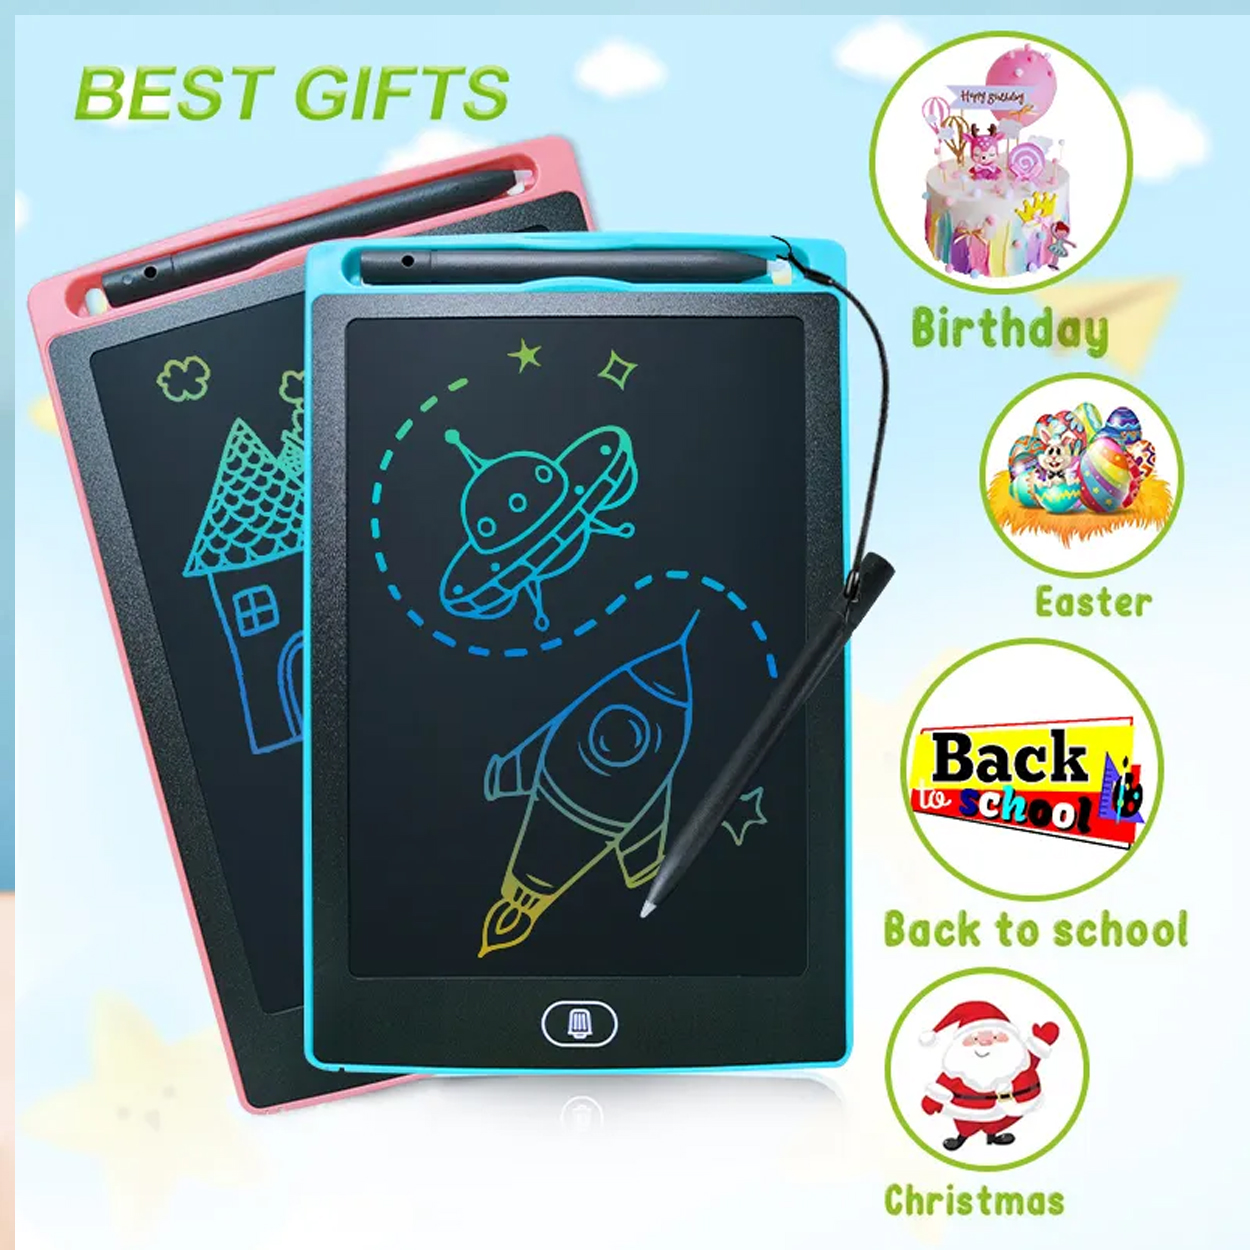 LCD Writing Pads 10 Inch Colorful Doodle Board Drawing Tablet for Kids Travel Games Activity Learning Toys Birthday Gifts for 3 4 5 6 Year Old Boys & Girls Toddlers Instant Erase Stylus Pen (4Pc)